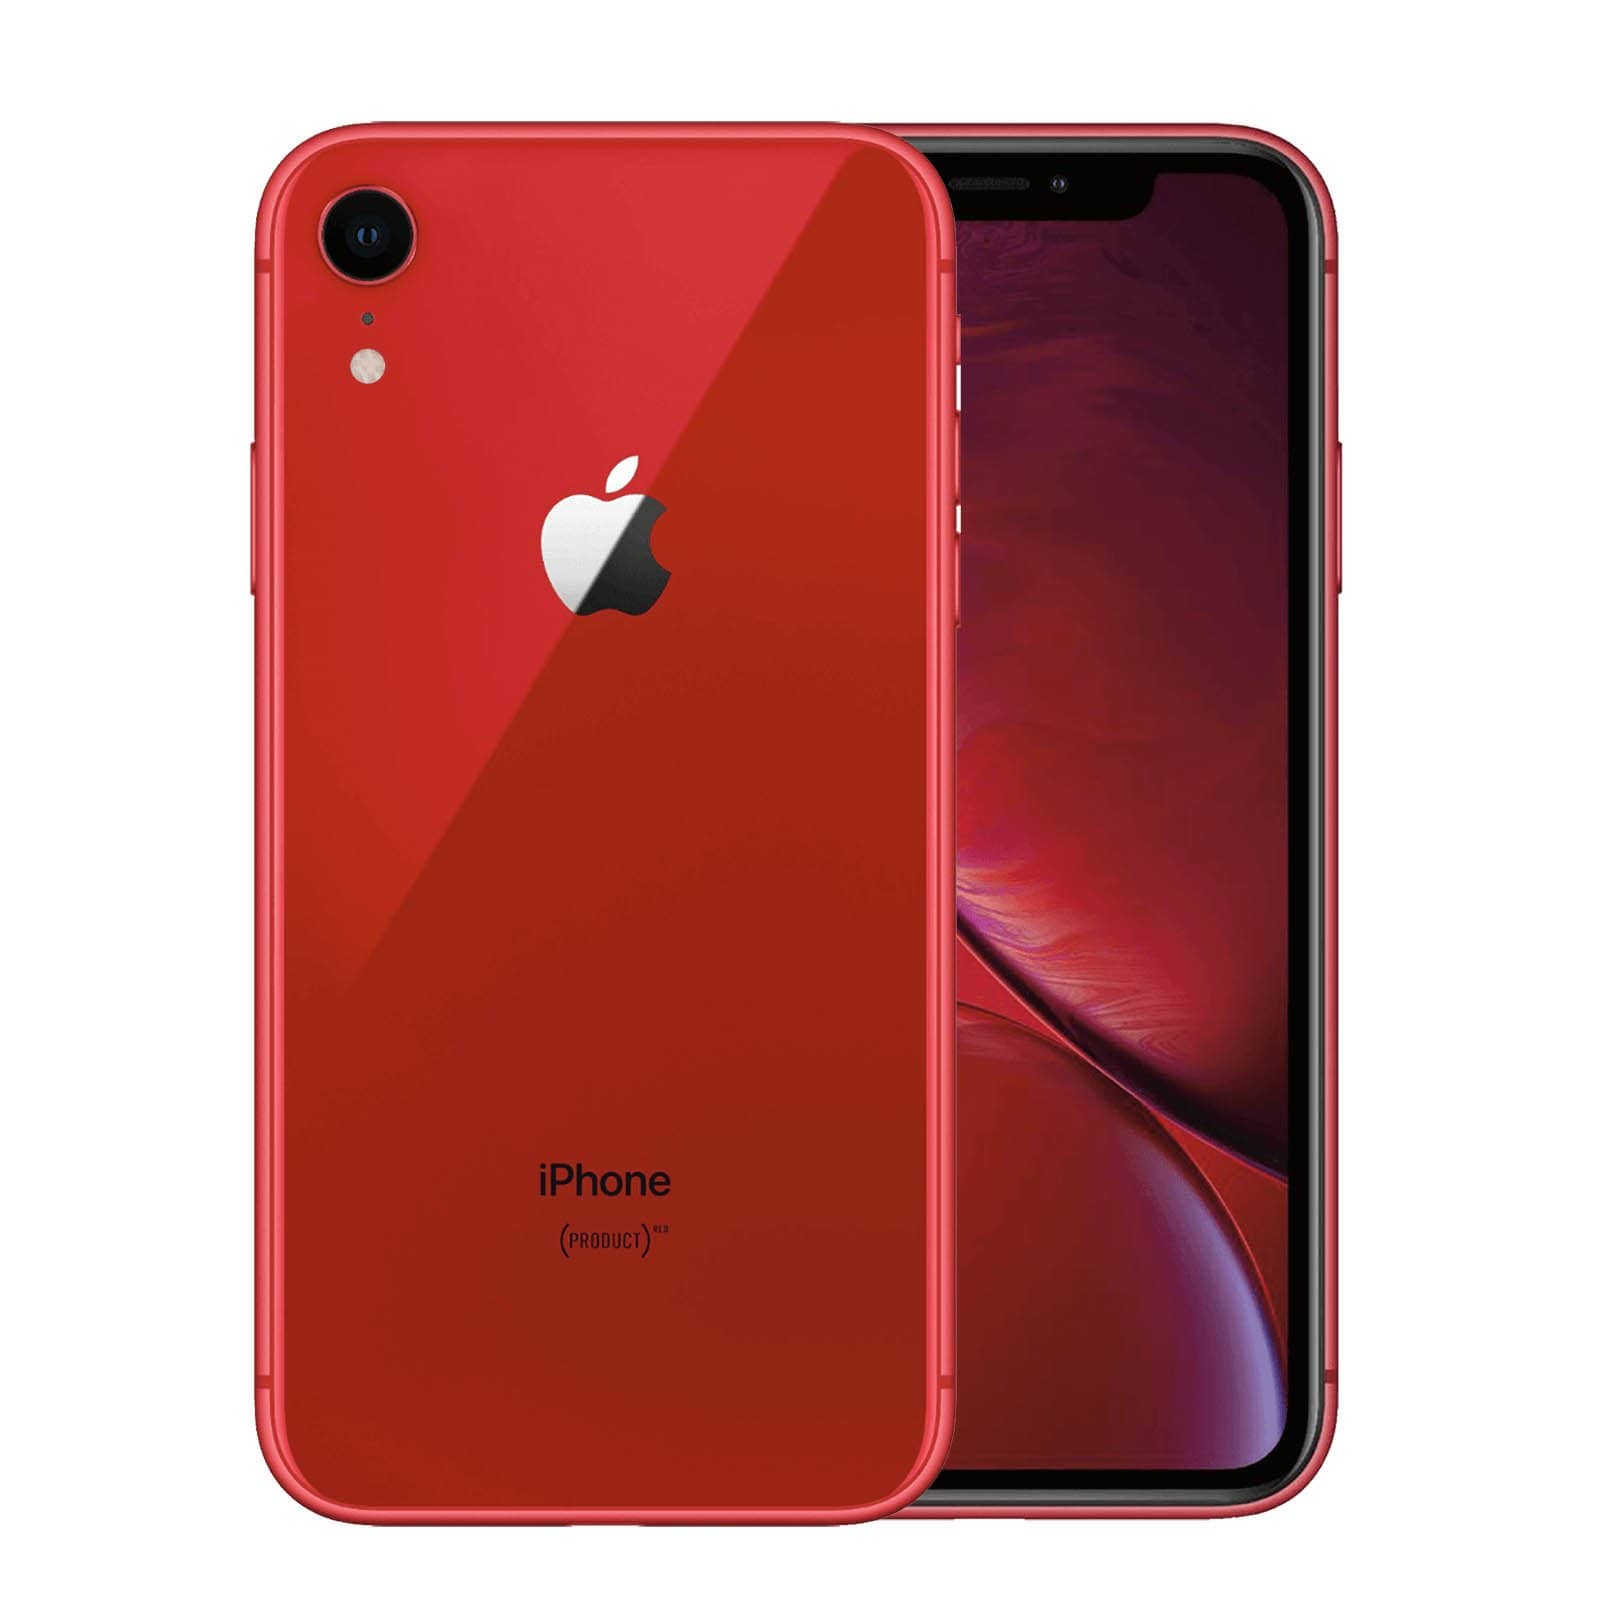 Apple iPhone XR 64GB Product Red Fair - Unlocked 64GB Product Red Fair